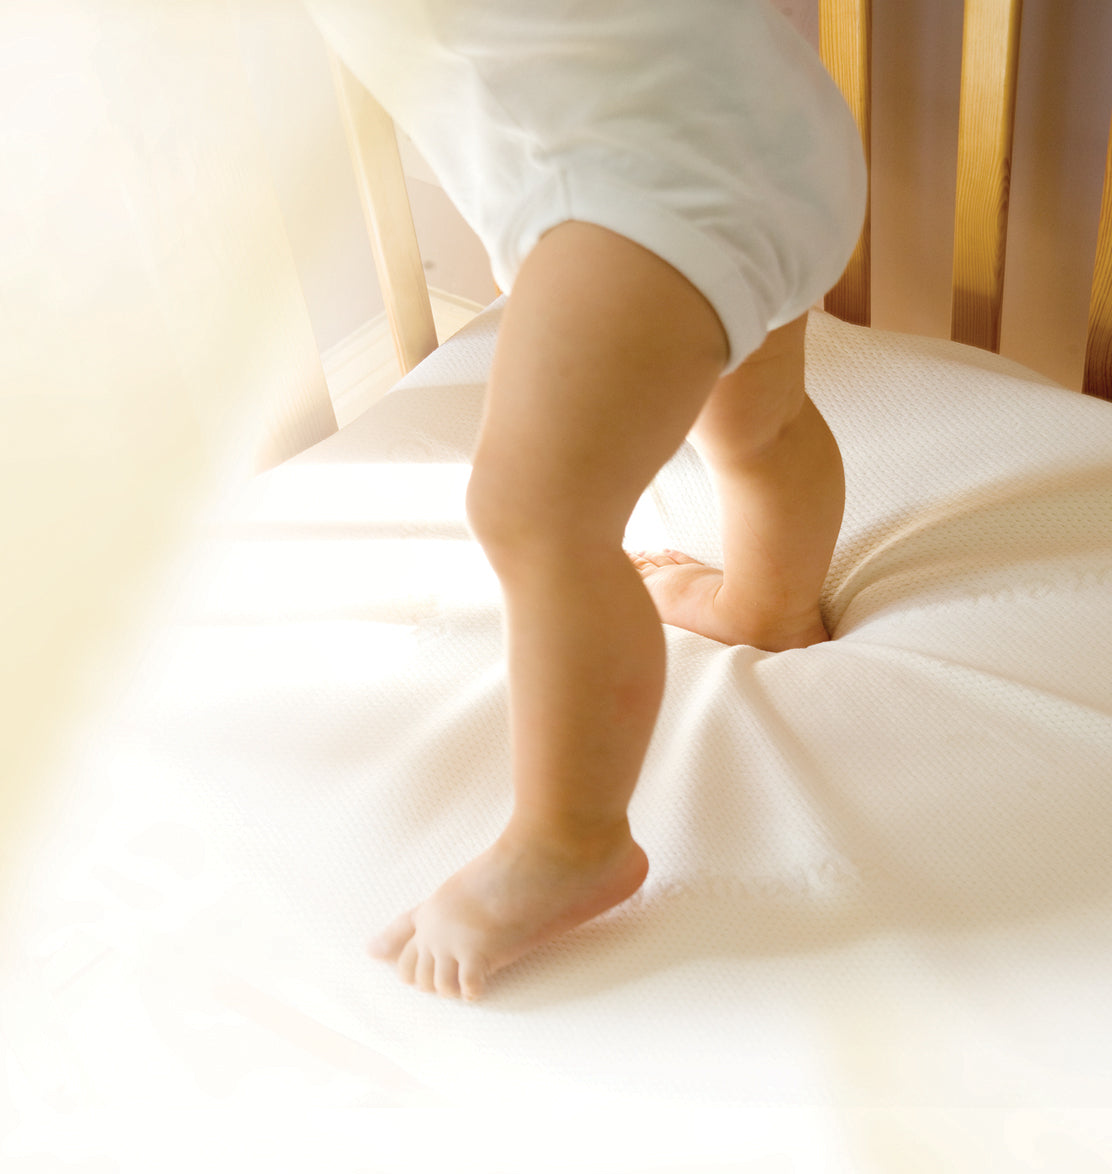 Clevamama ClevaBed  Mattress Protector - Cot Size